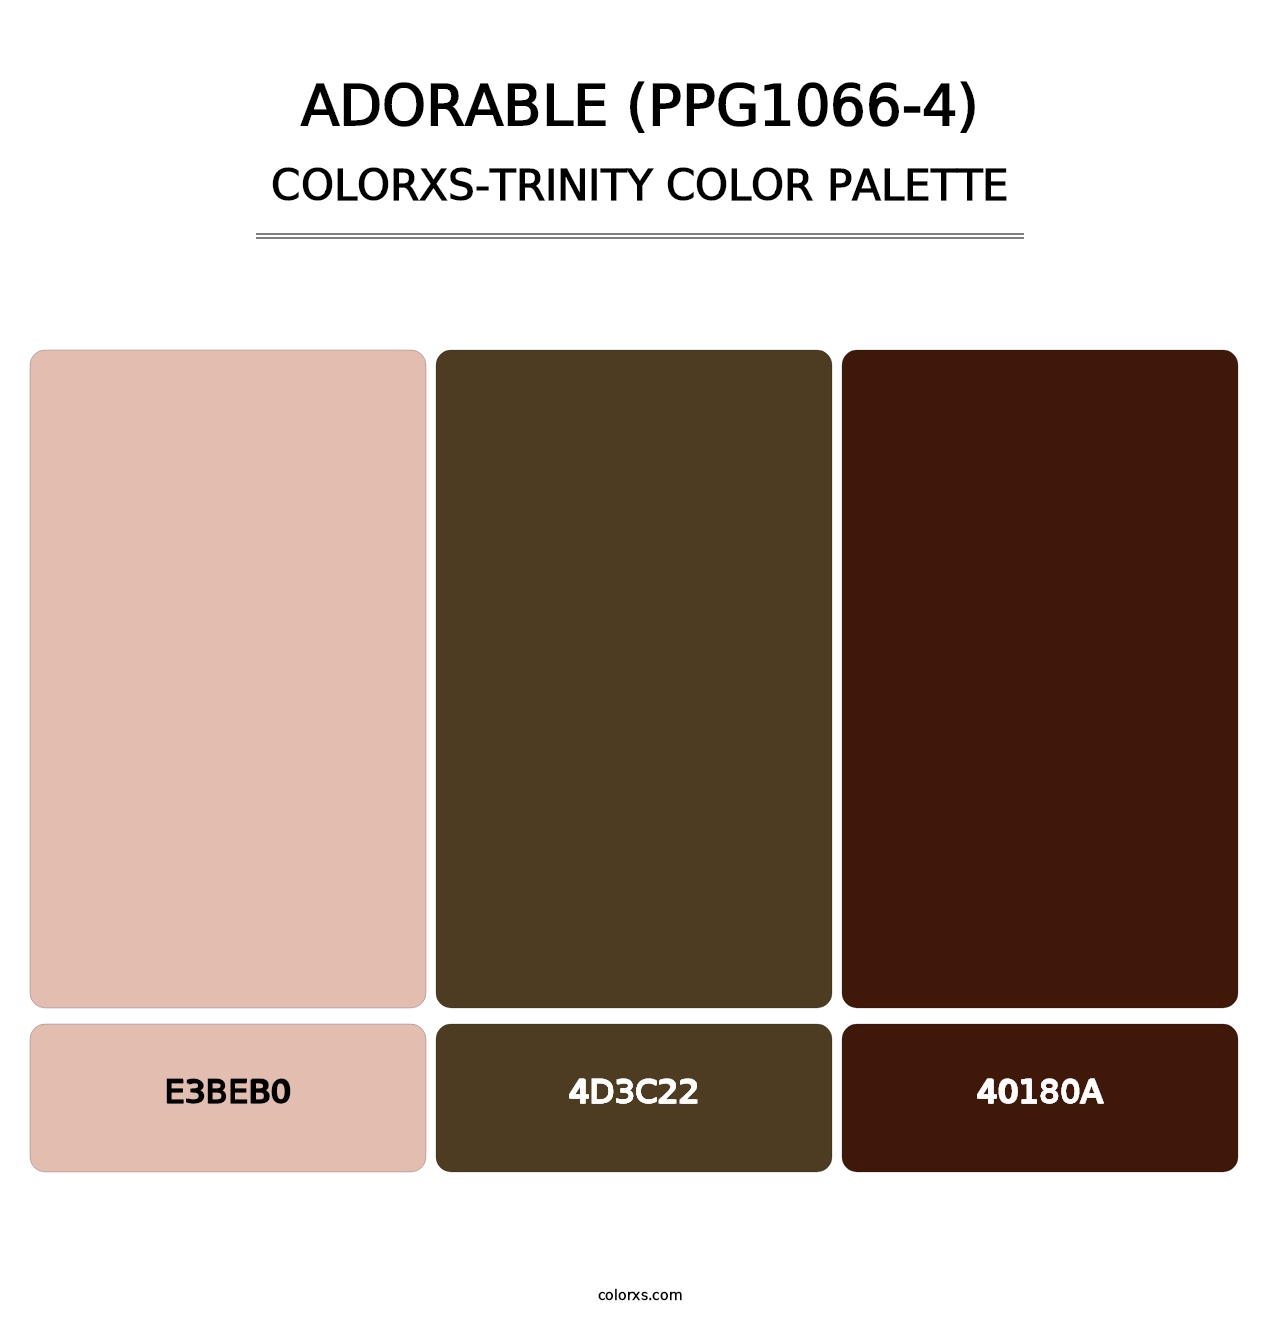 Adorable (PPG1066-4) - Colorxs Trinity Palette